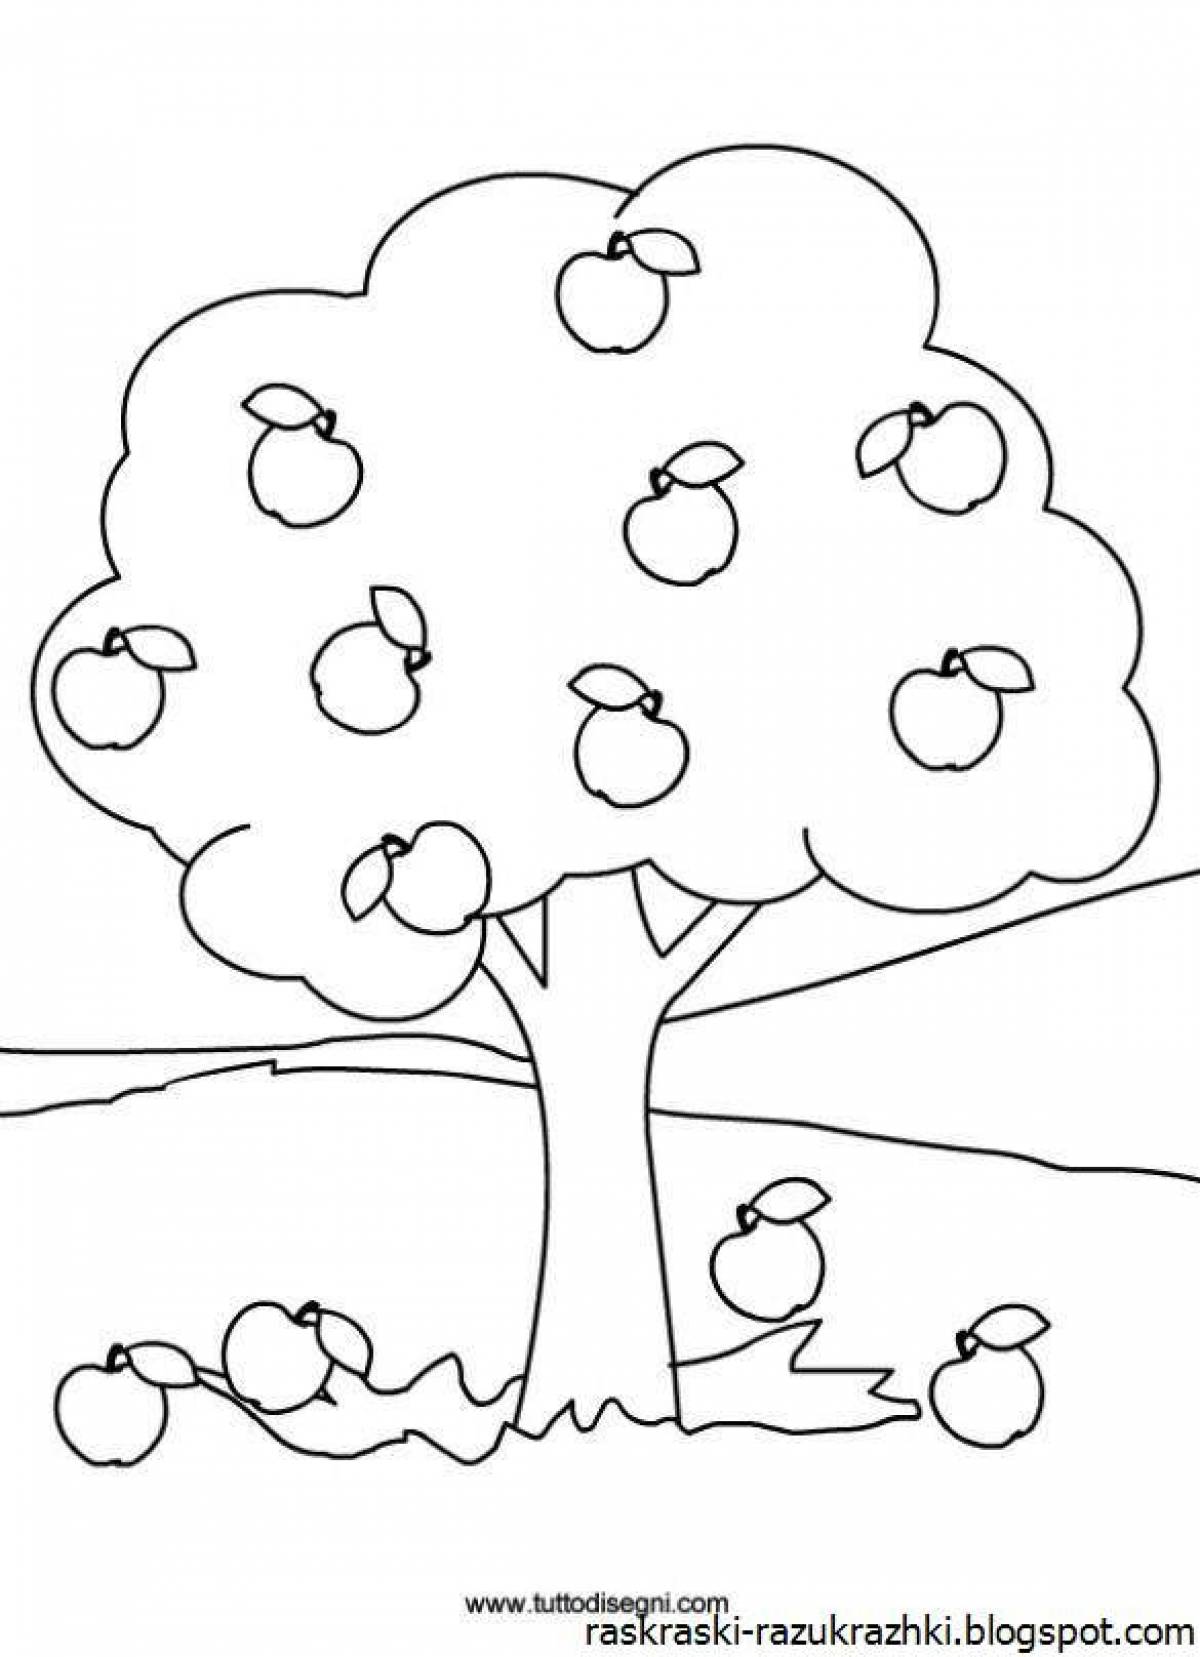 Adorable tree coloring book for kids